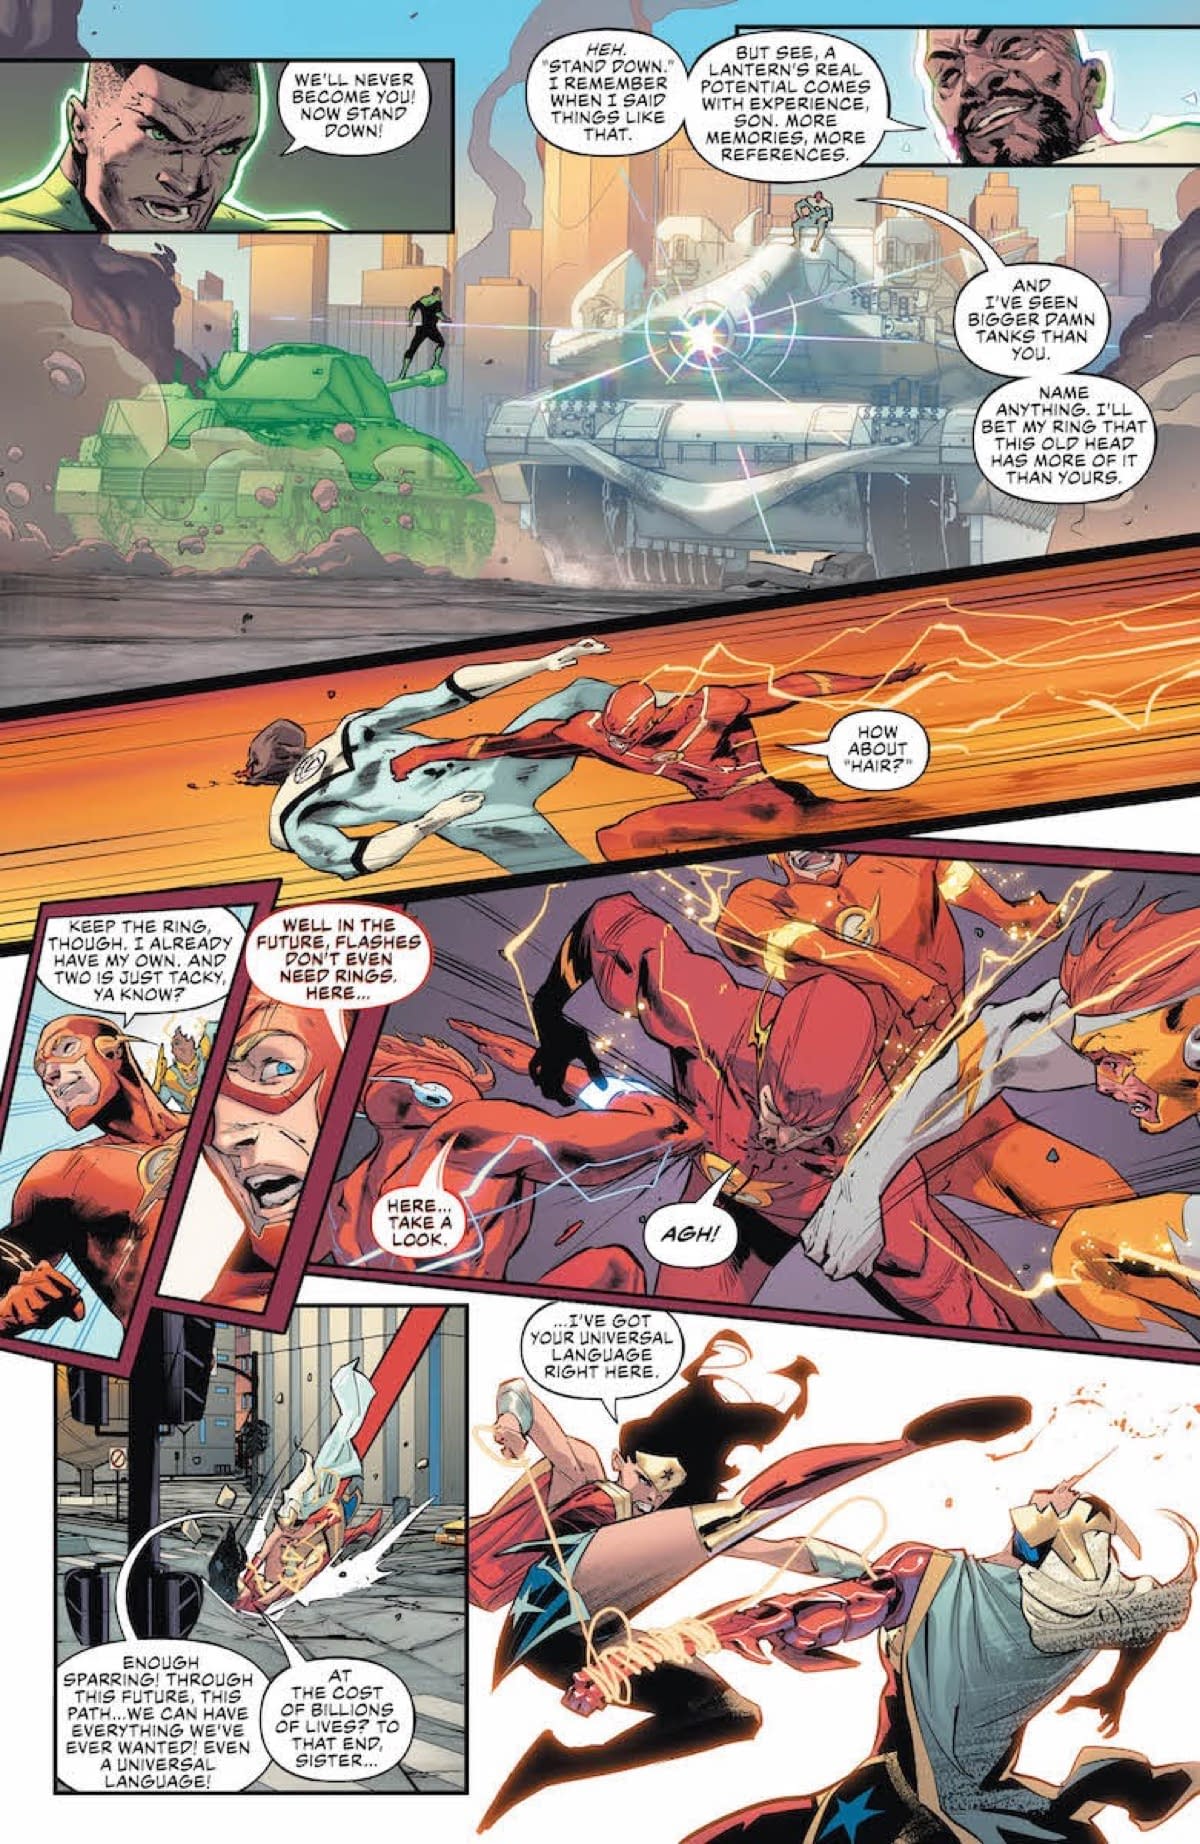 Superman Still Can't Stop Imagining Lois's Death (Justice League #24 Preview)